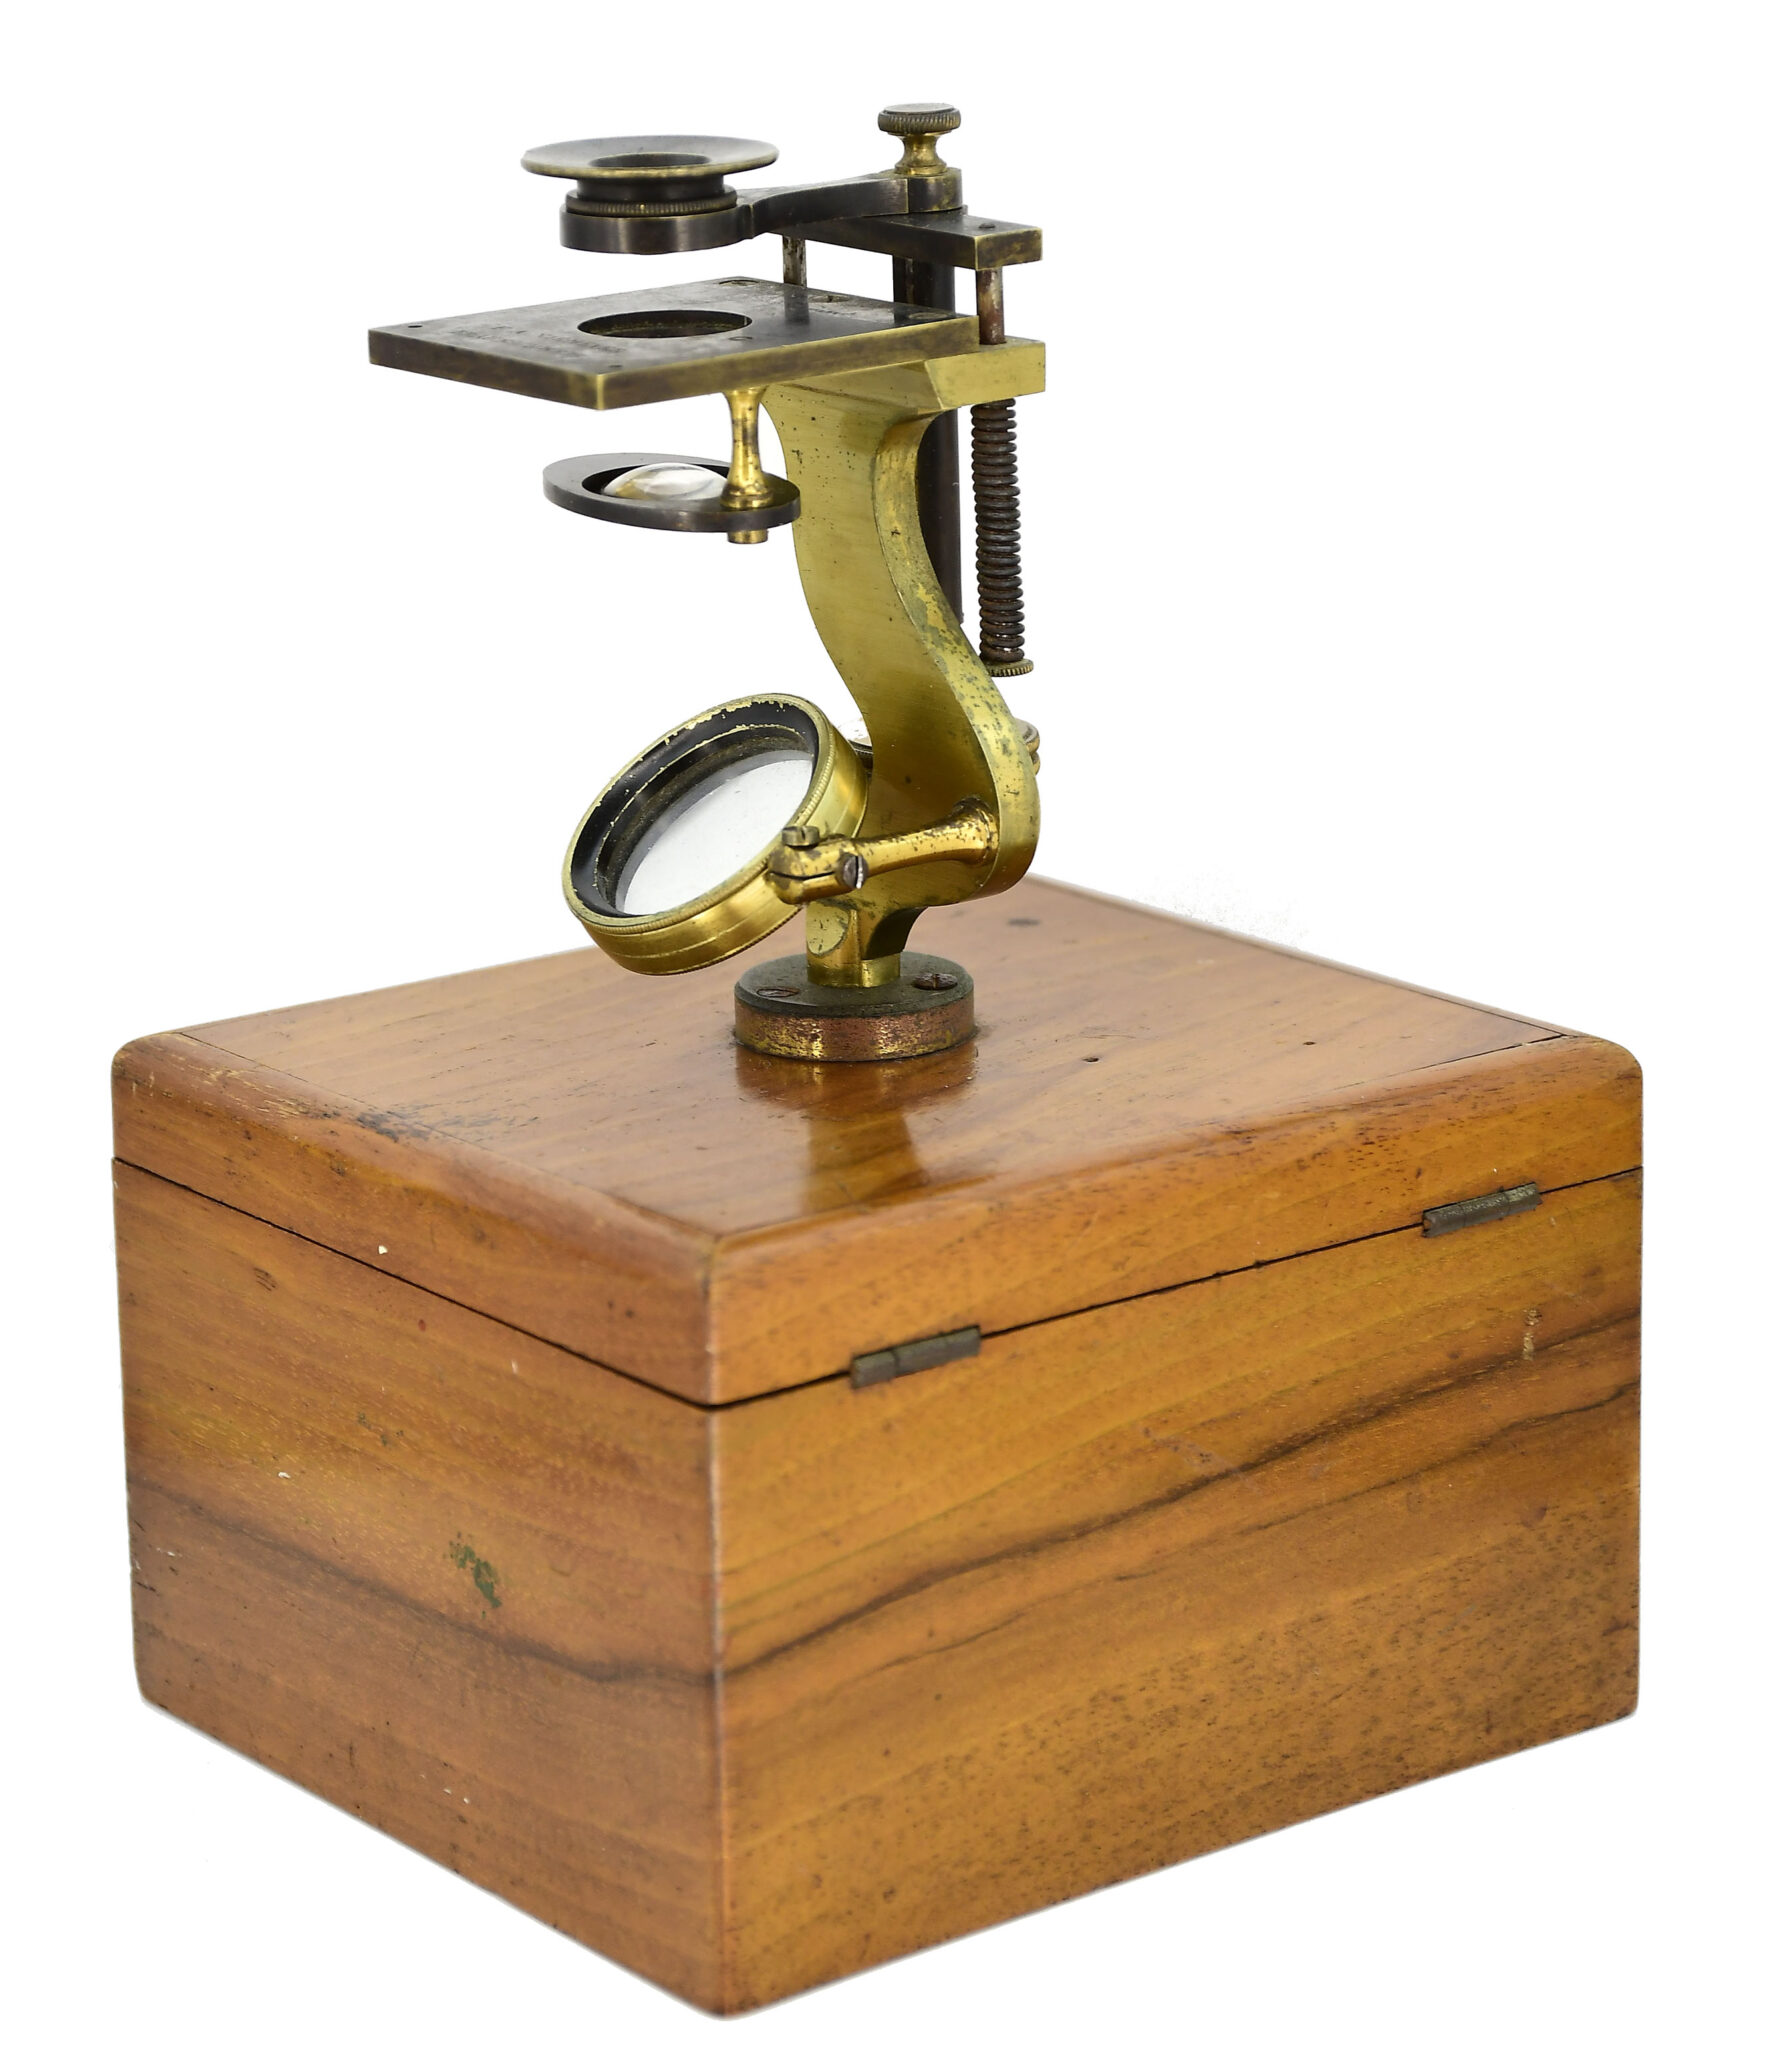 One-Off Copy of Carl Zeiss’ First Model Microscope Signed A.F. Niemeyer Braunschweig, ca. 1850